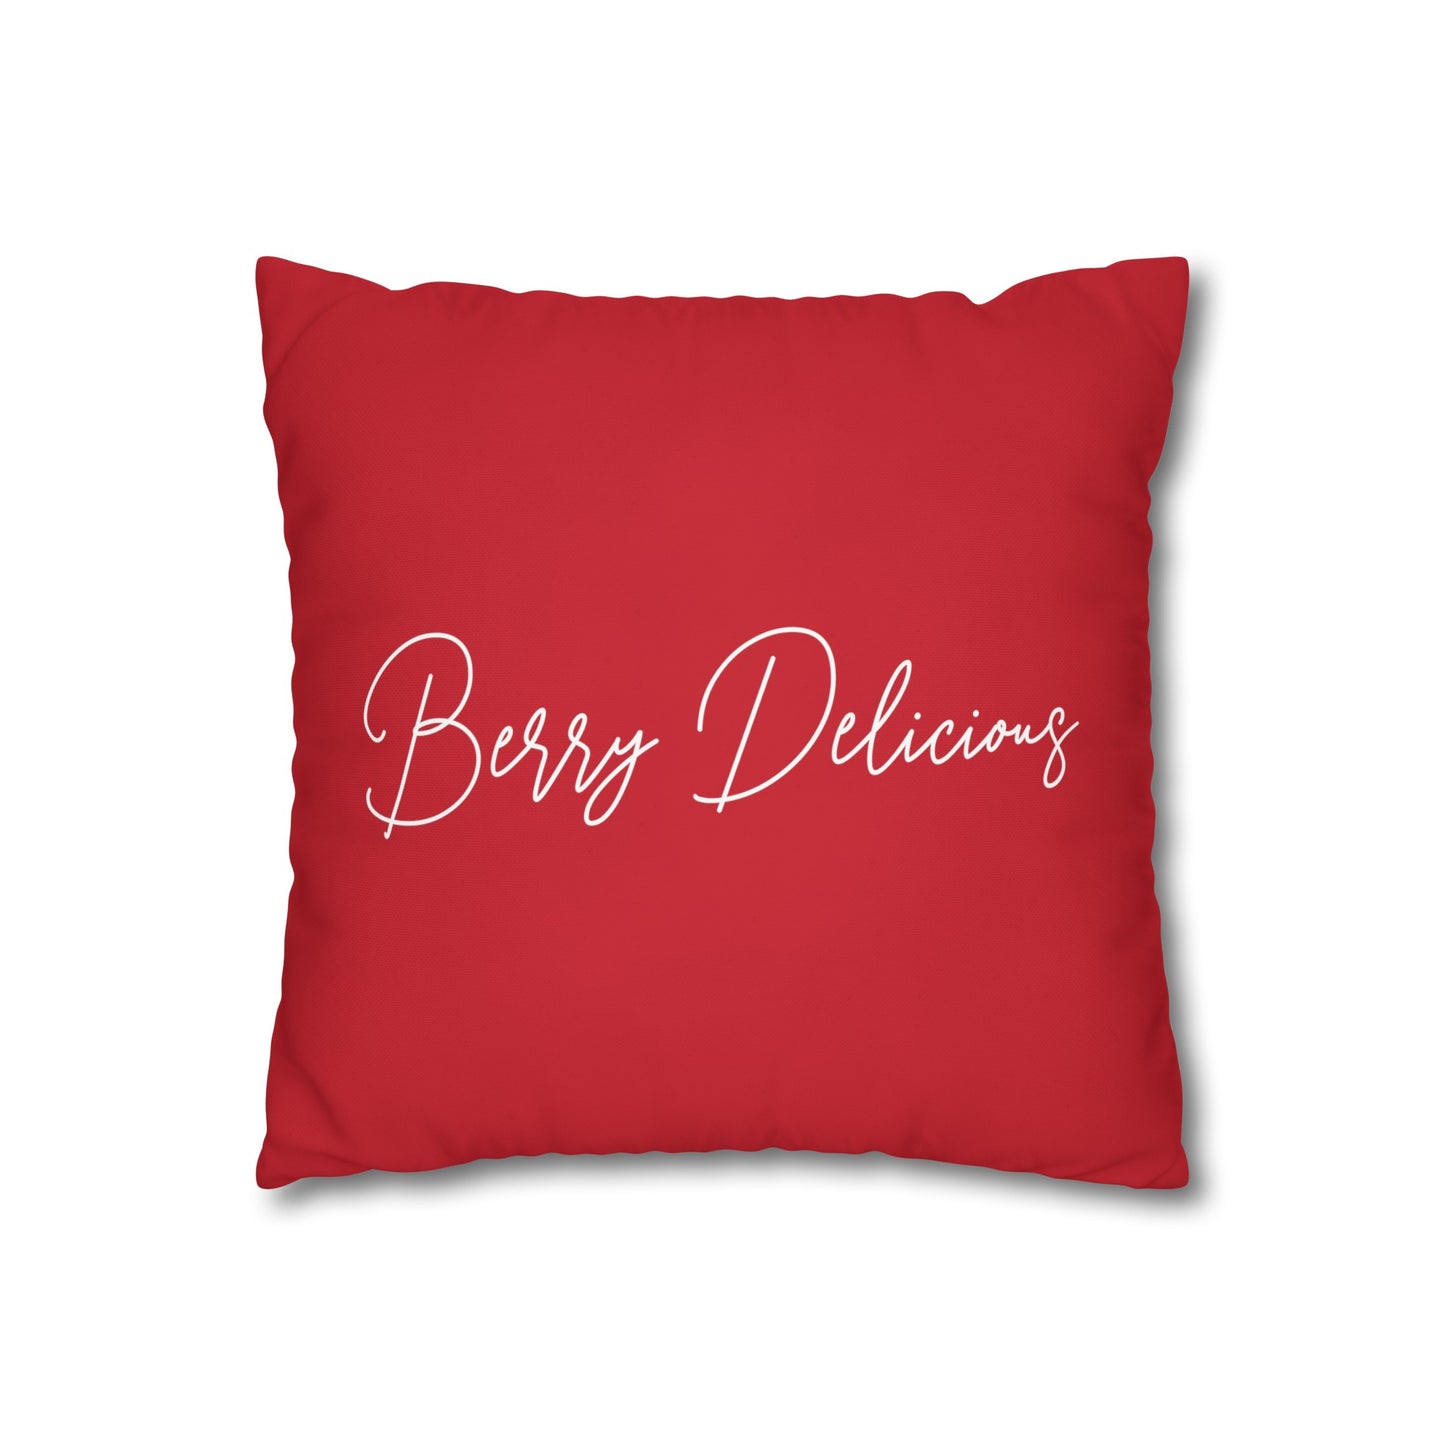 Berry Delicious Strawberry #3 Cushion Cover